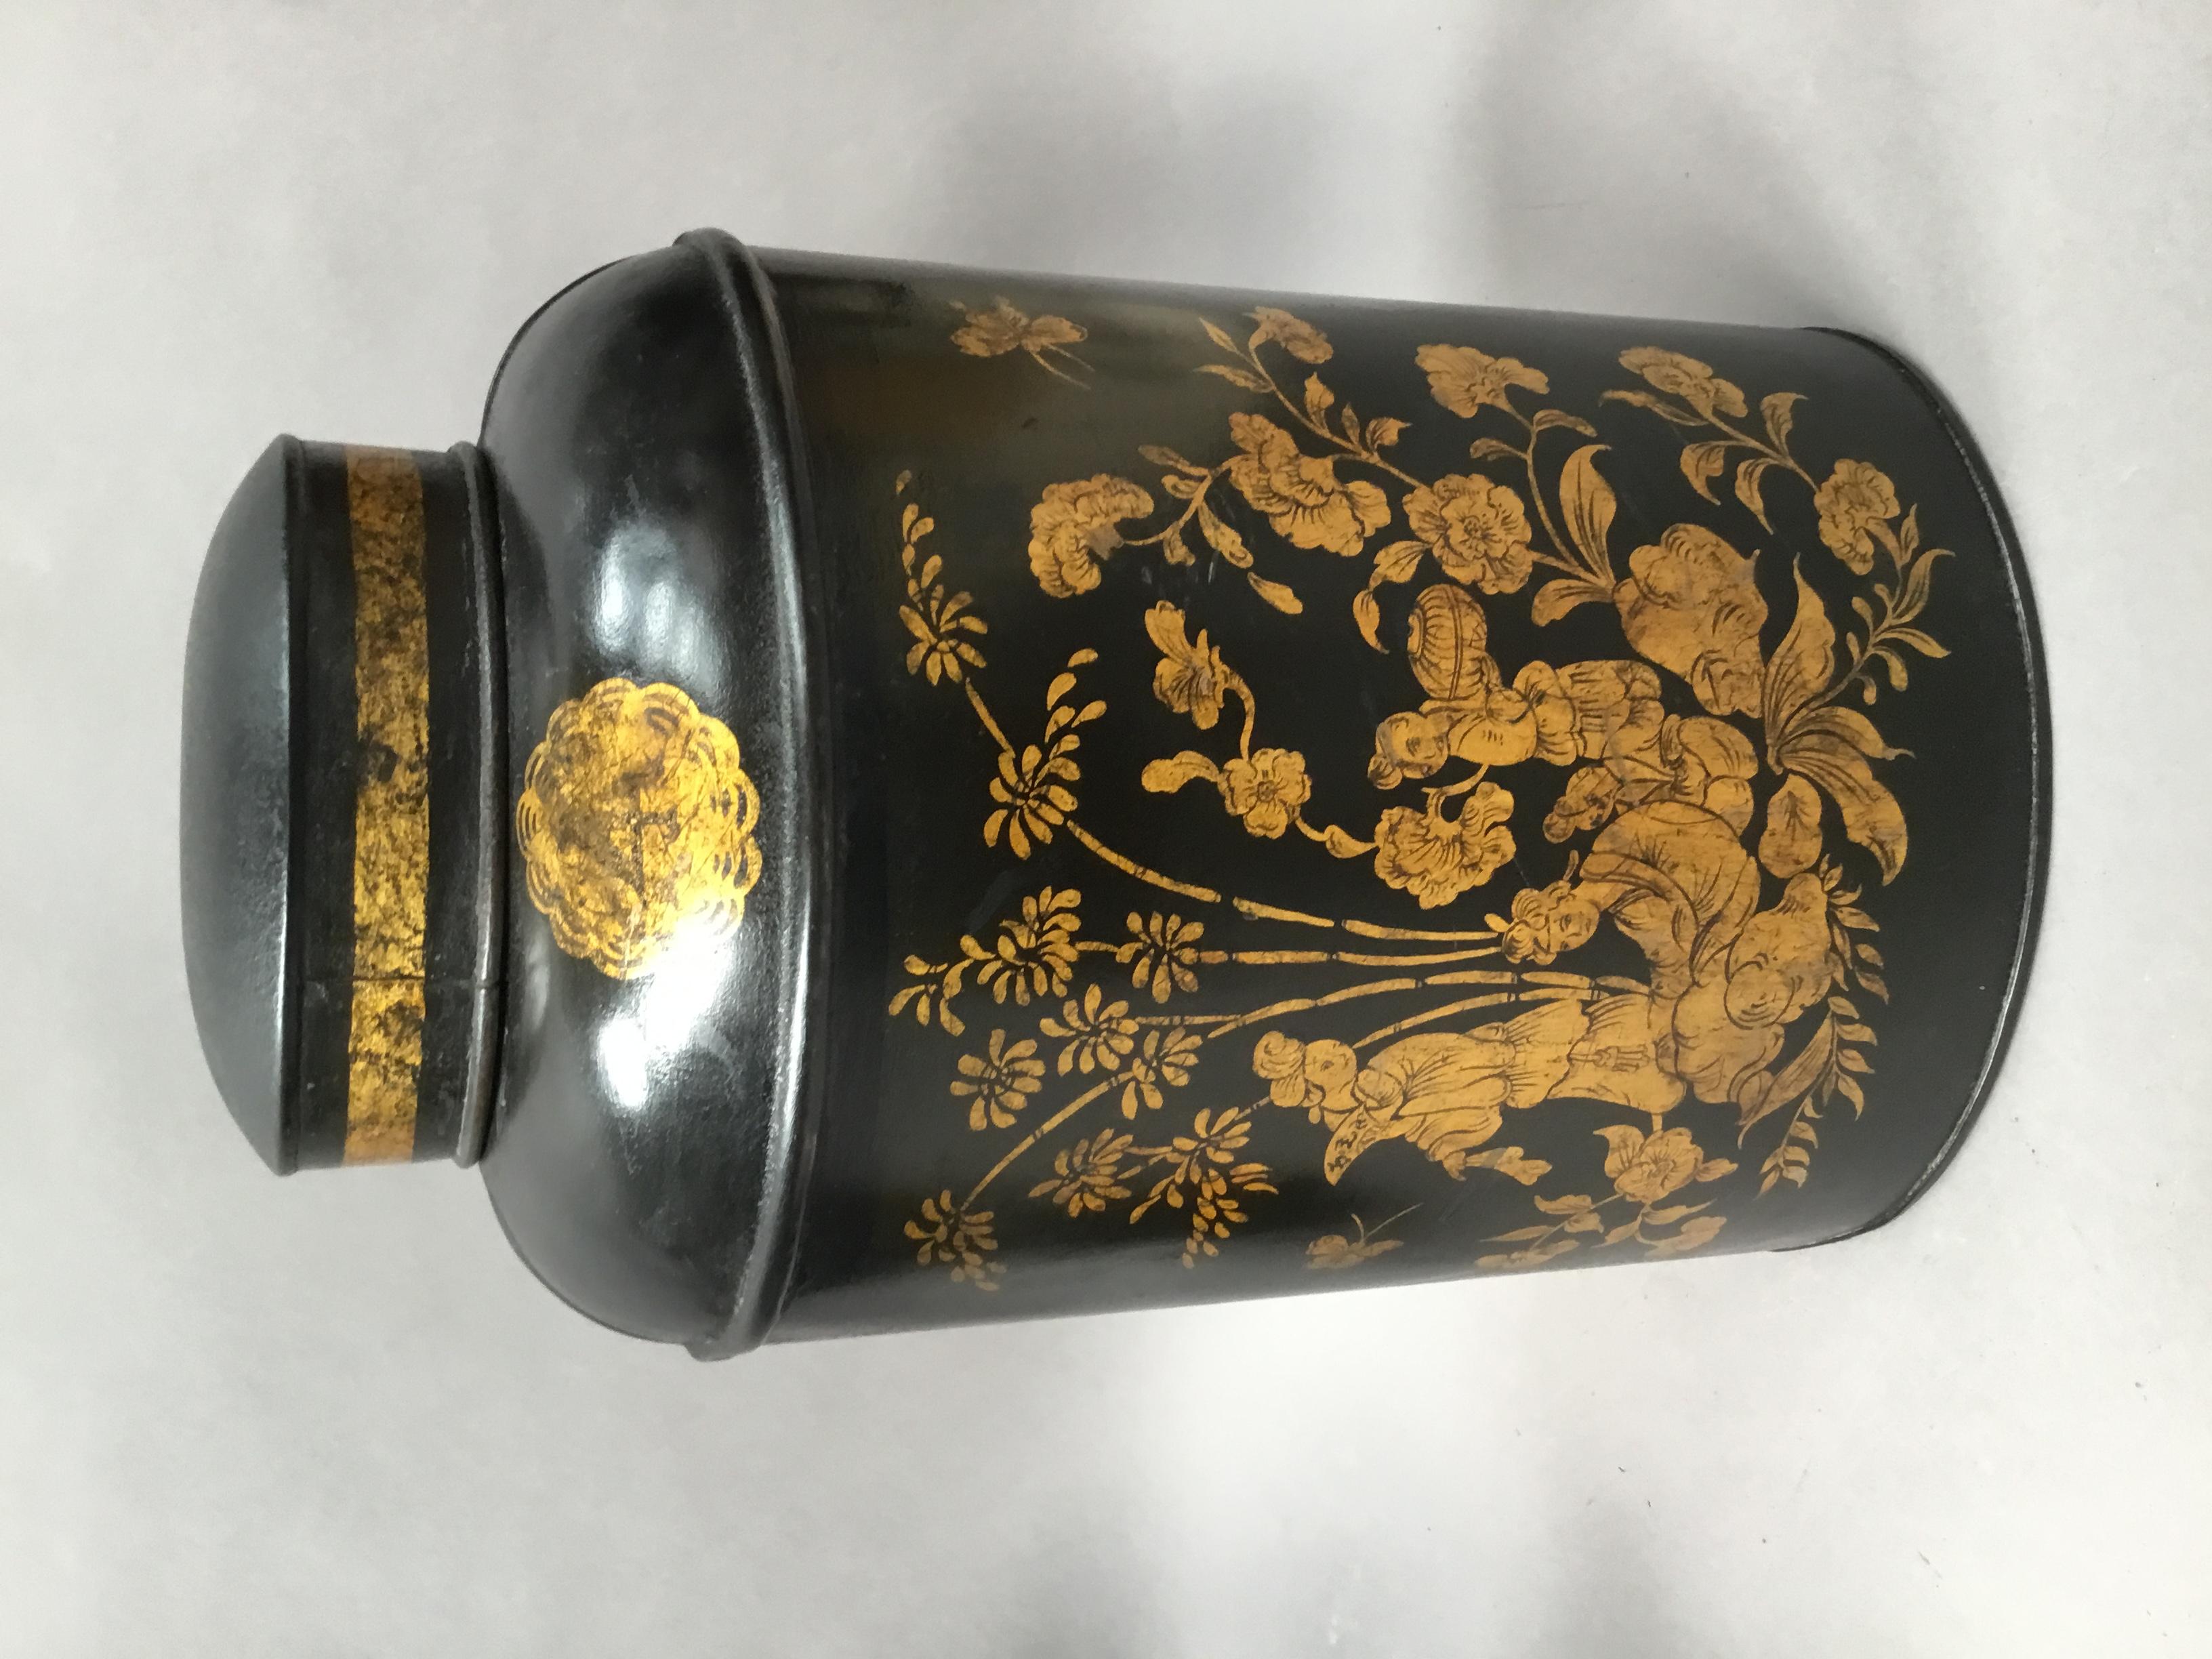 19th Century Pair of Chinoiserie Lacquered Tole Tea Canisters by John Bartlett In Good Condition For Sale In Moreton-in-Marsh, Gloucestershire